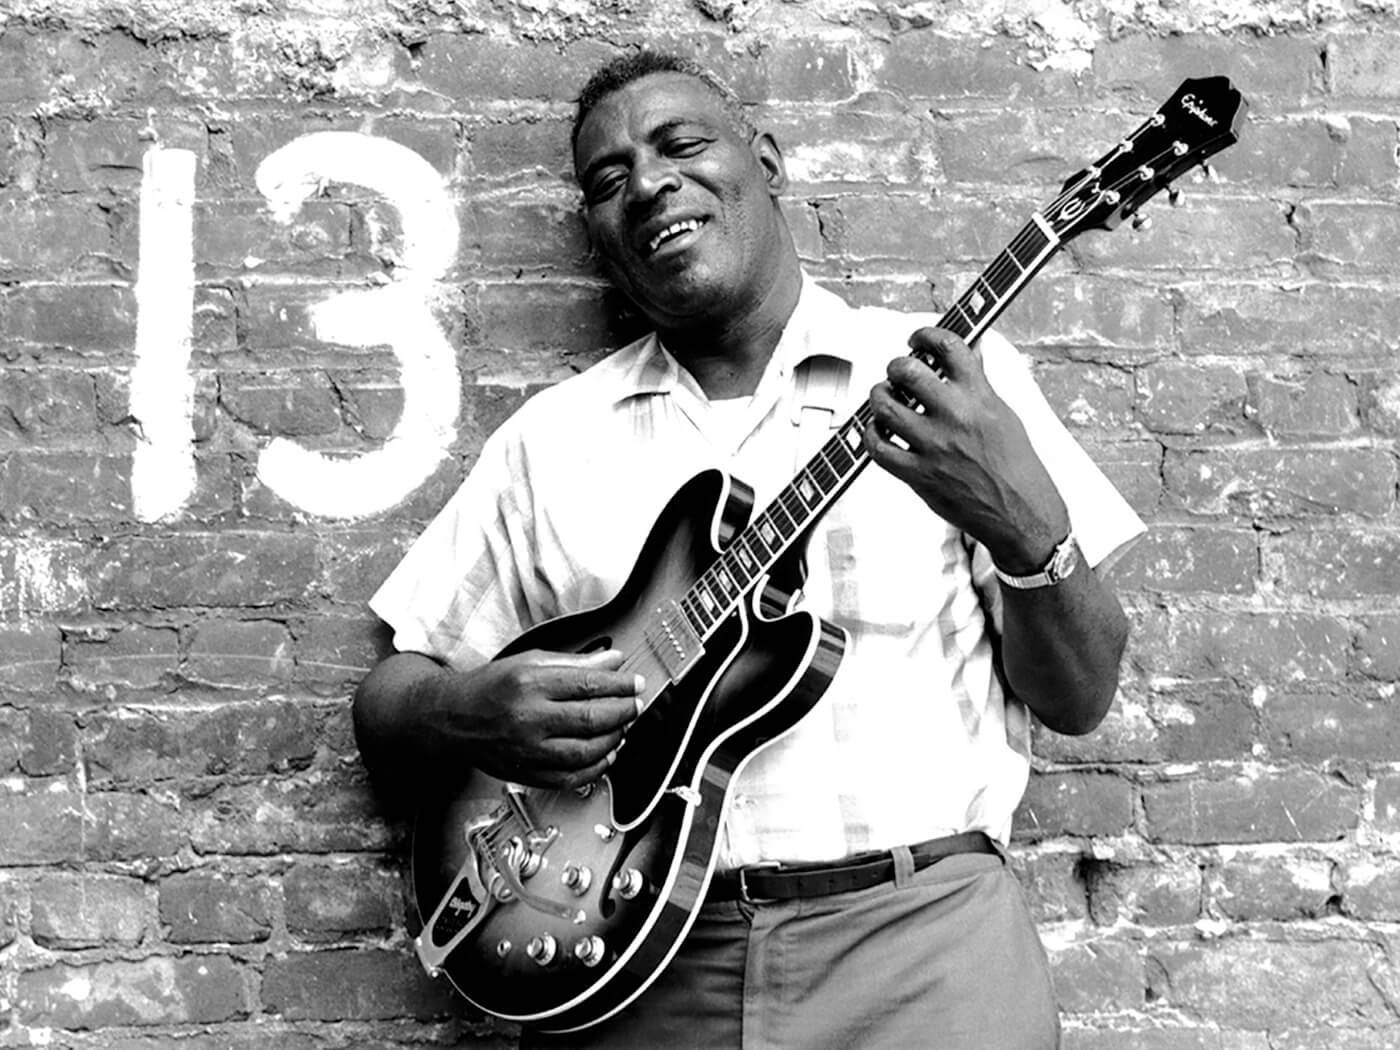 Blues musician Howlin' Wolf with an Epiphone hollowbody electric guitar in 1968 by Sandy Guy Schoenfeld/Michael Ochs Archives/Getty Images